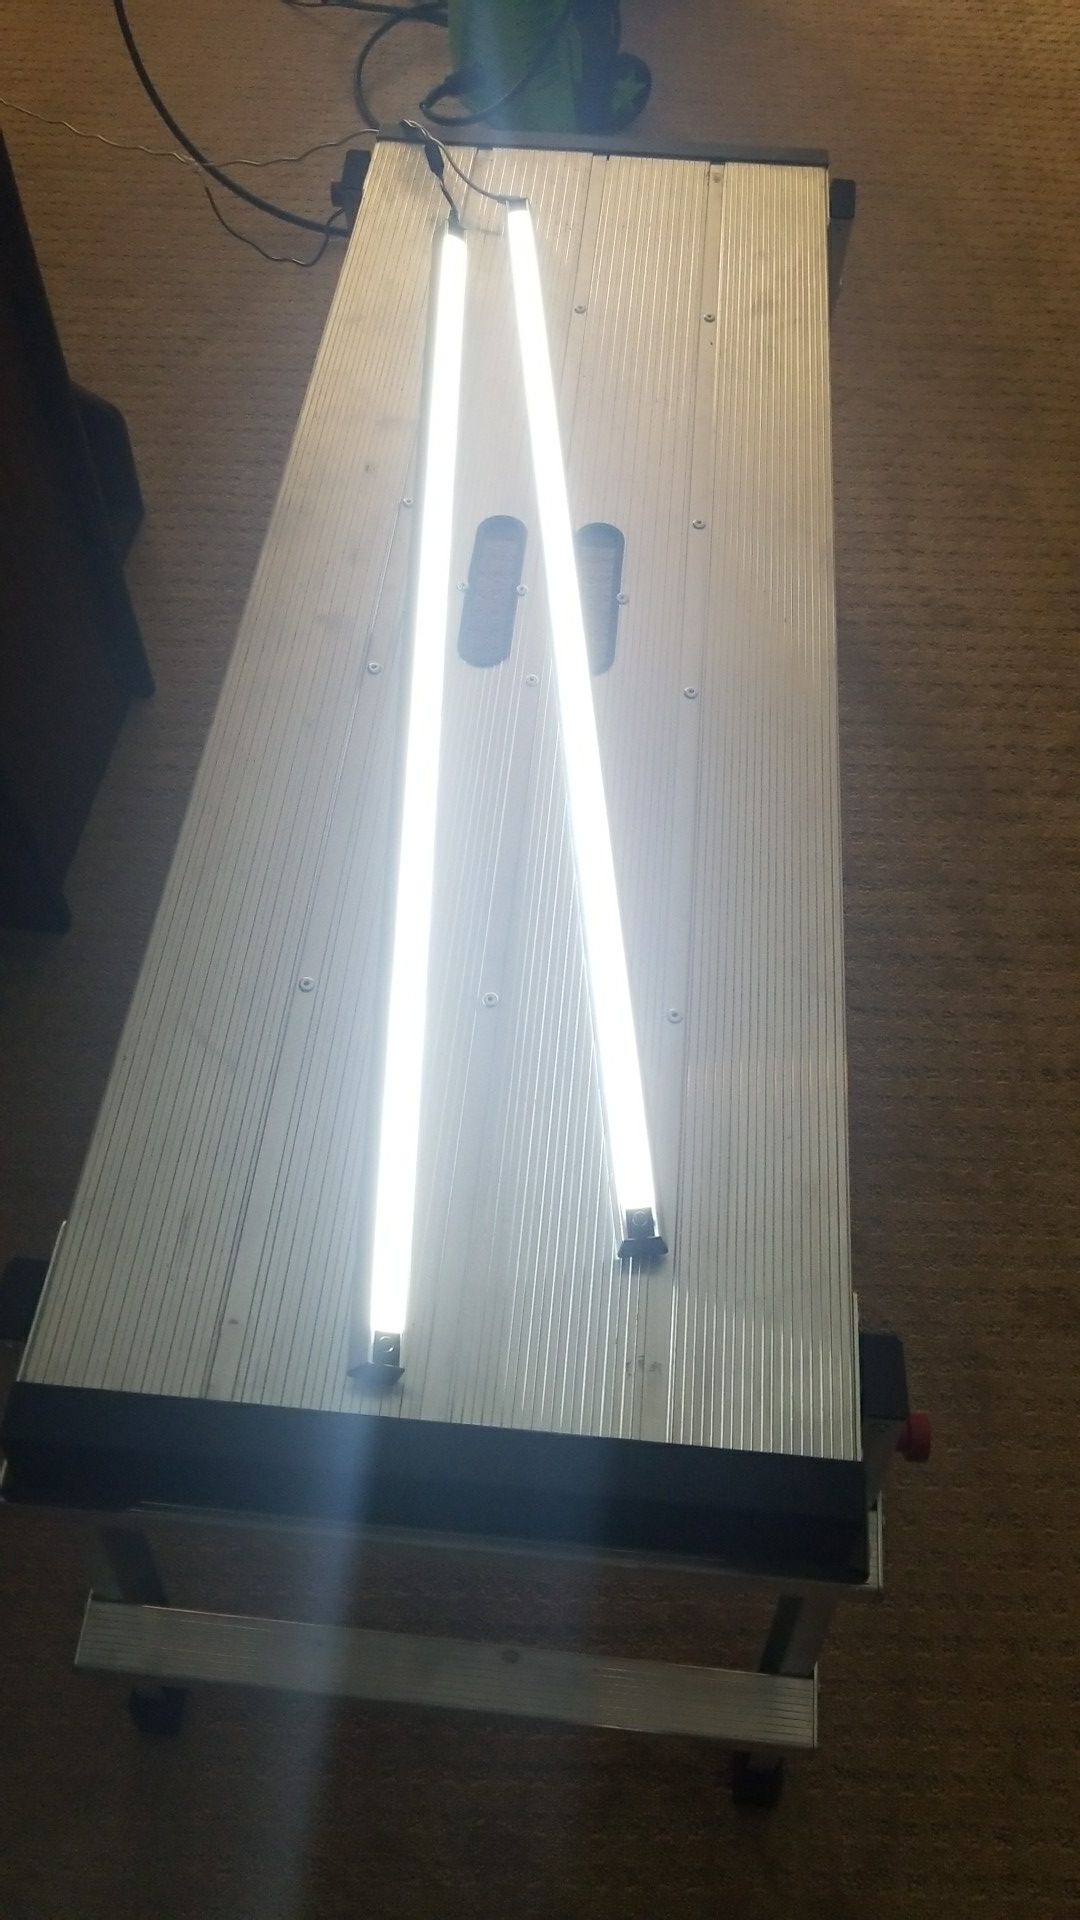 Two 3 ft led strips daylight and very bright! Perfect for desk and work bench